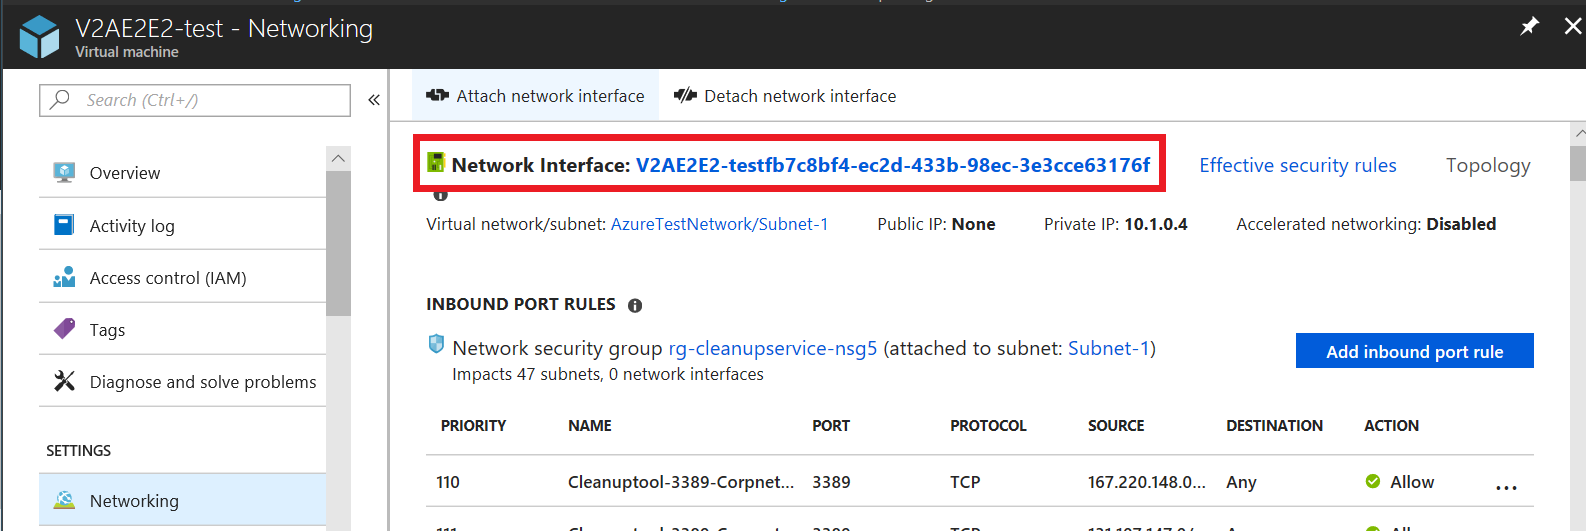 Screenshot shows the Networking page for a virtual machine with the network interface name selected.